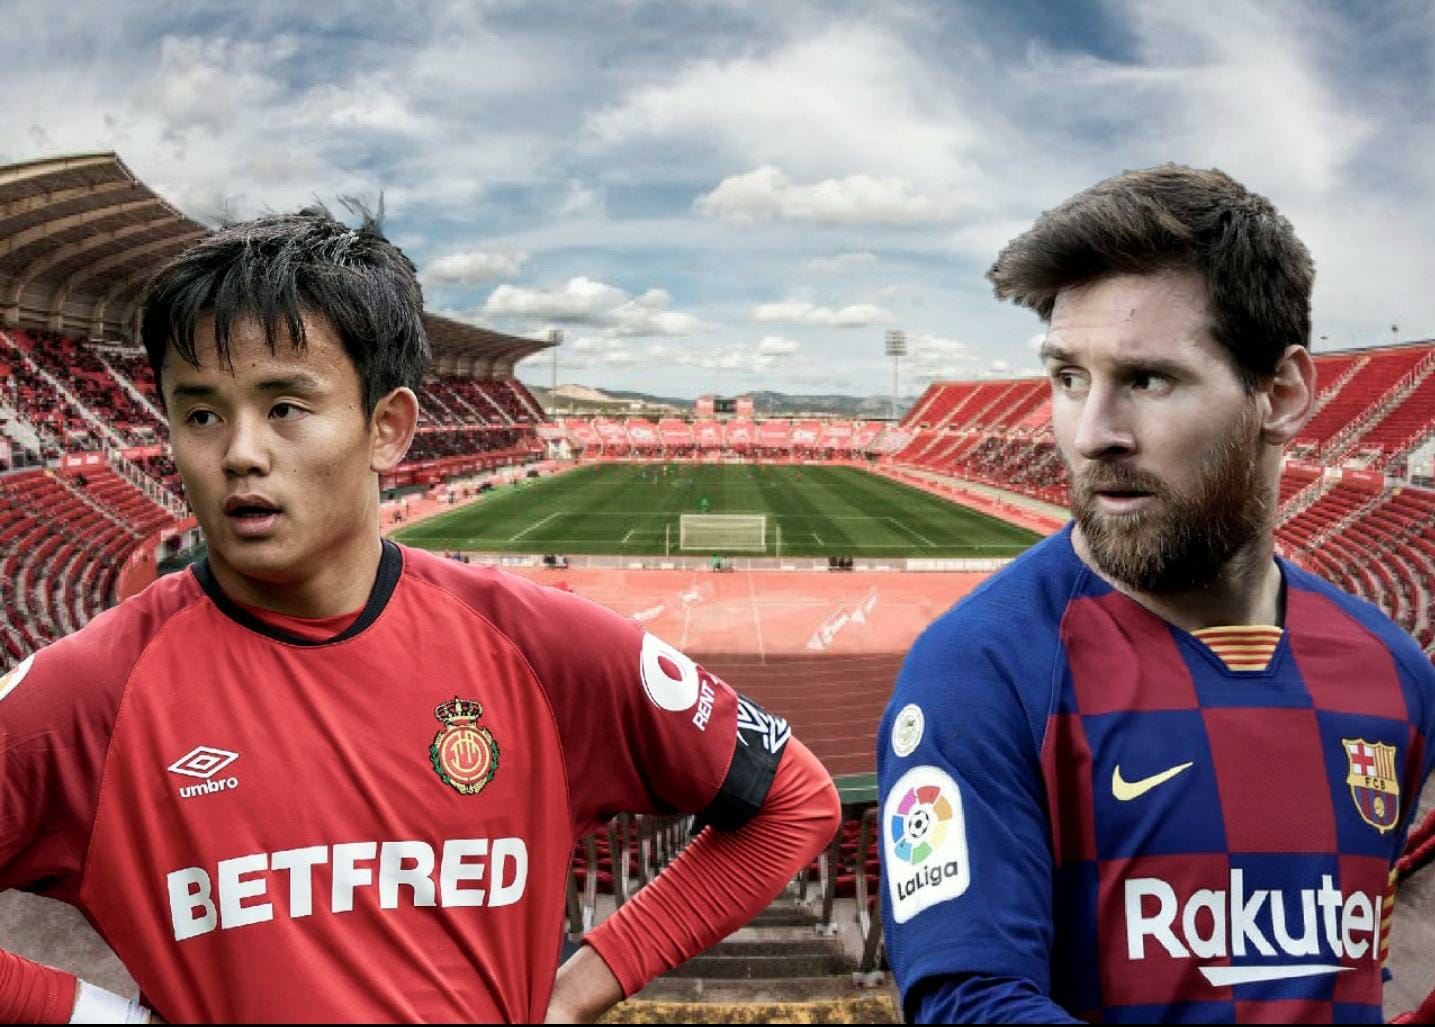 RCD Mallorca's Take Kubo (L) and Barcelona's Lionel Messi (R), in front of the newly-renamed Visit Mallorca Estadi / Photo montage by Blaugranagram